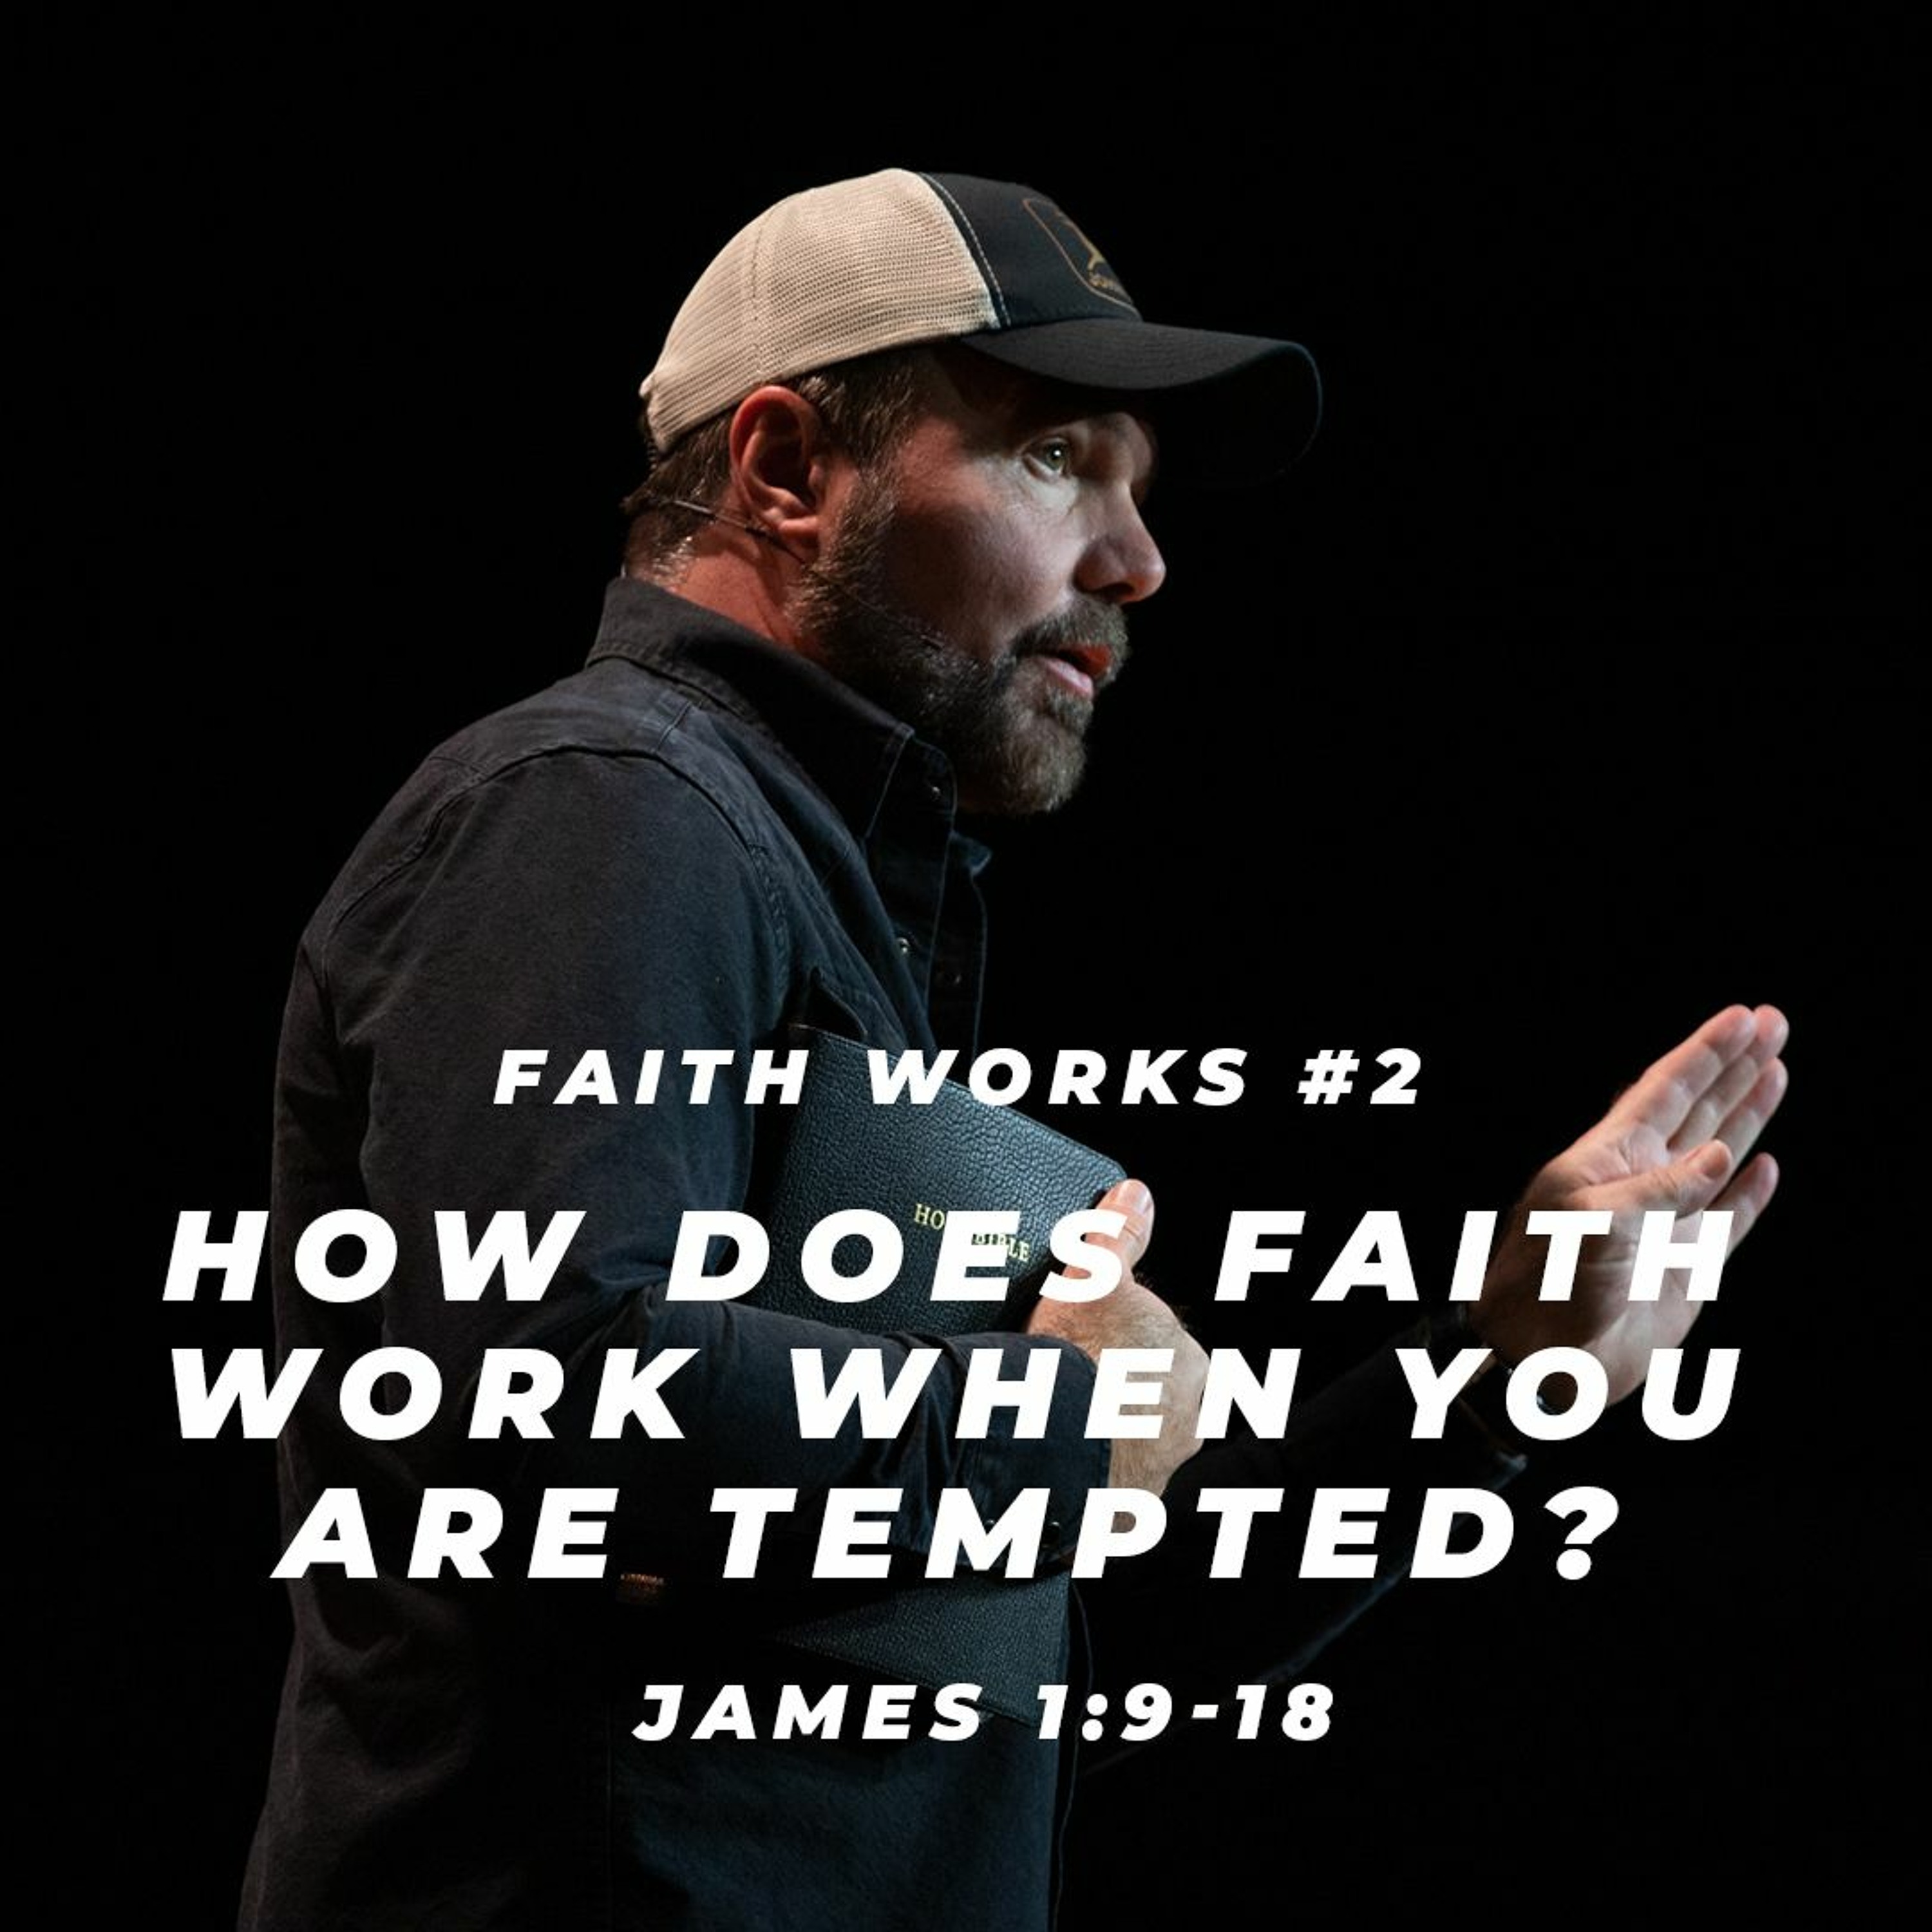  James  2 How does  faith work  when you are tempted 